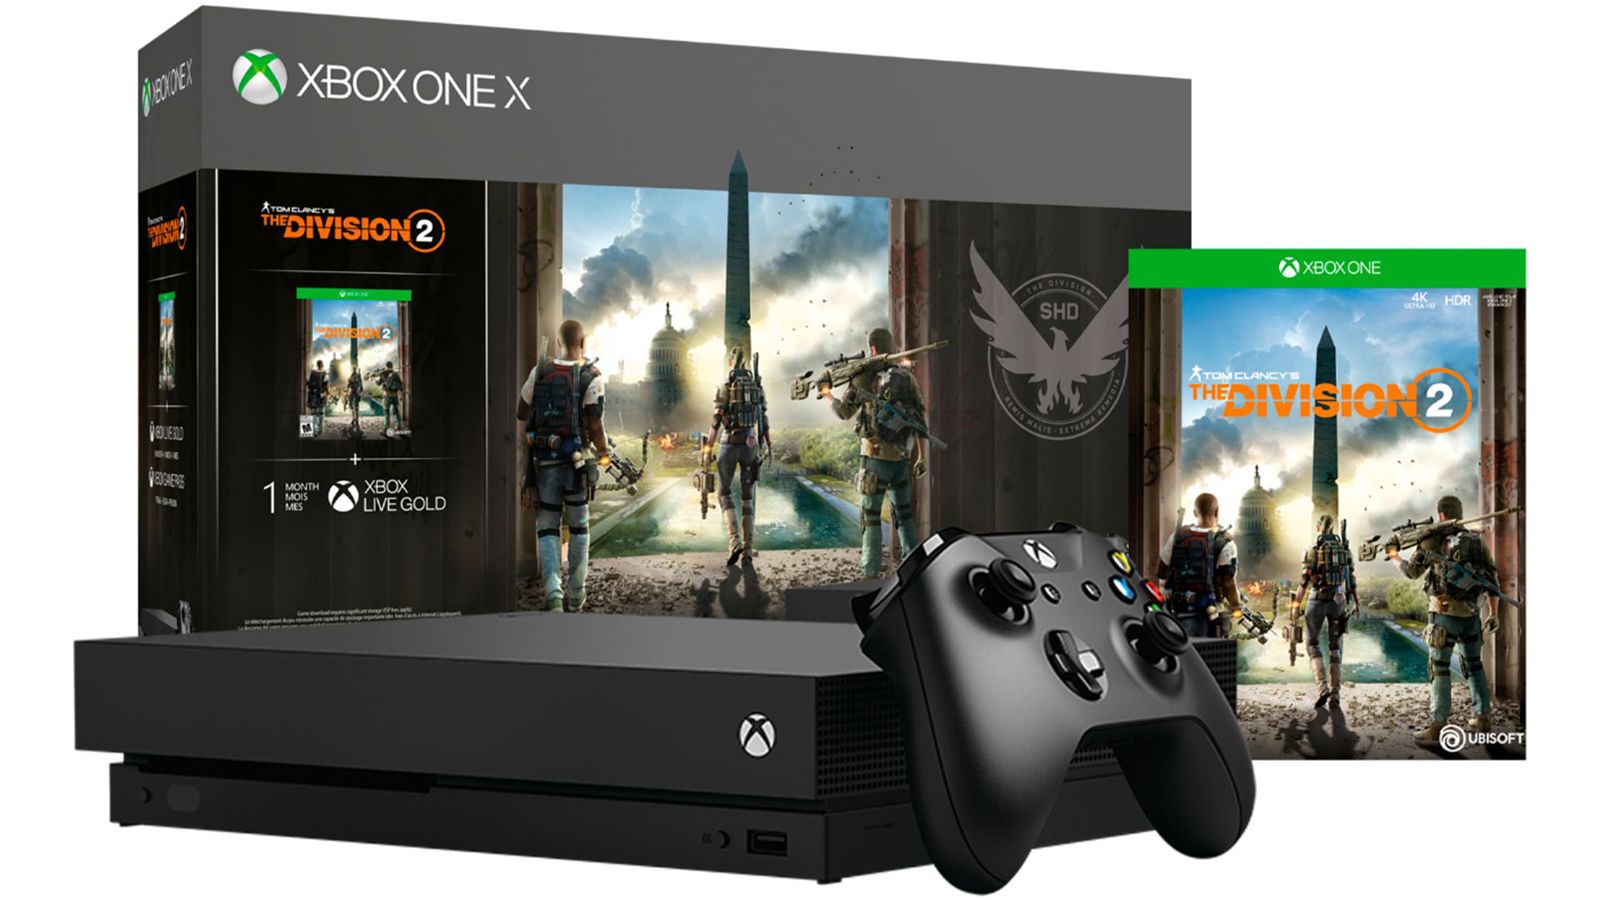 This bundle includes a download code for The Division 2, and thanks to 1TB of storage in the One X, you'll be able to grow your game library.<br /><strong>Tom Clancy's The Divison 2 Xbox One X 1TB Bundle ($399, originally $499; </strong><a href="https://click.linksynergy.com/deeplink?id=Fr/49/7rhGg&mid=24542&u1=0607xboxe32019&murl=https%3A%2F%2Fwww.microsoft.com%2Fen-us%2Fp%2Fxbox-one-x-1tb-console-tom-clancys-the-division-2-bundle%2F8r9hkbr2240c%3Fcid%3Dmsft_web_collection%26activetab%3Dpivot%253aoverviewtab" target="_blank" target="_blank"><strong>microsoft.com</strong></a><strong>)</strong>